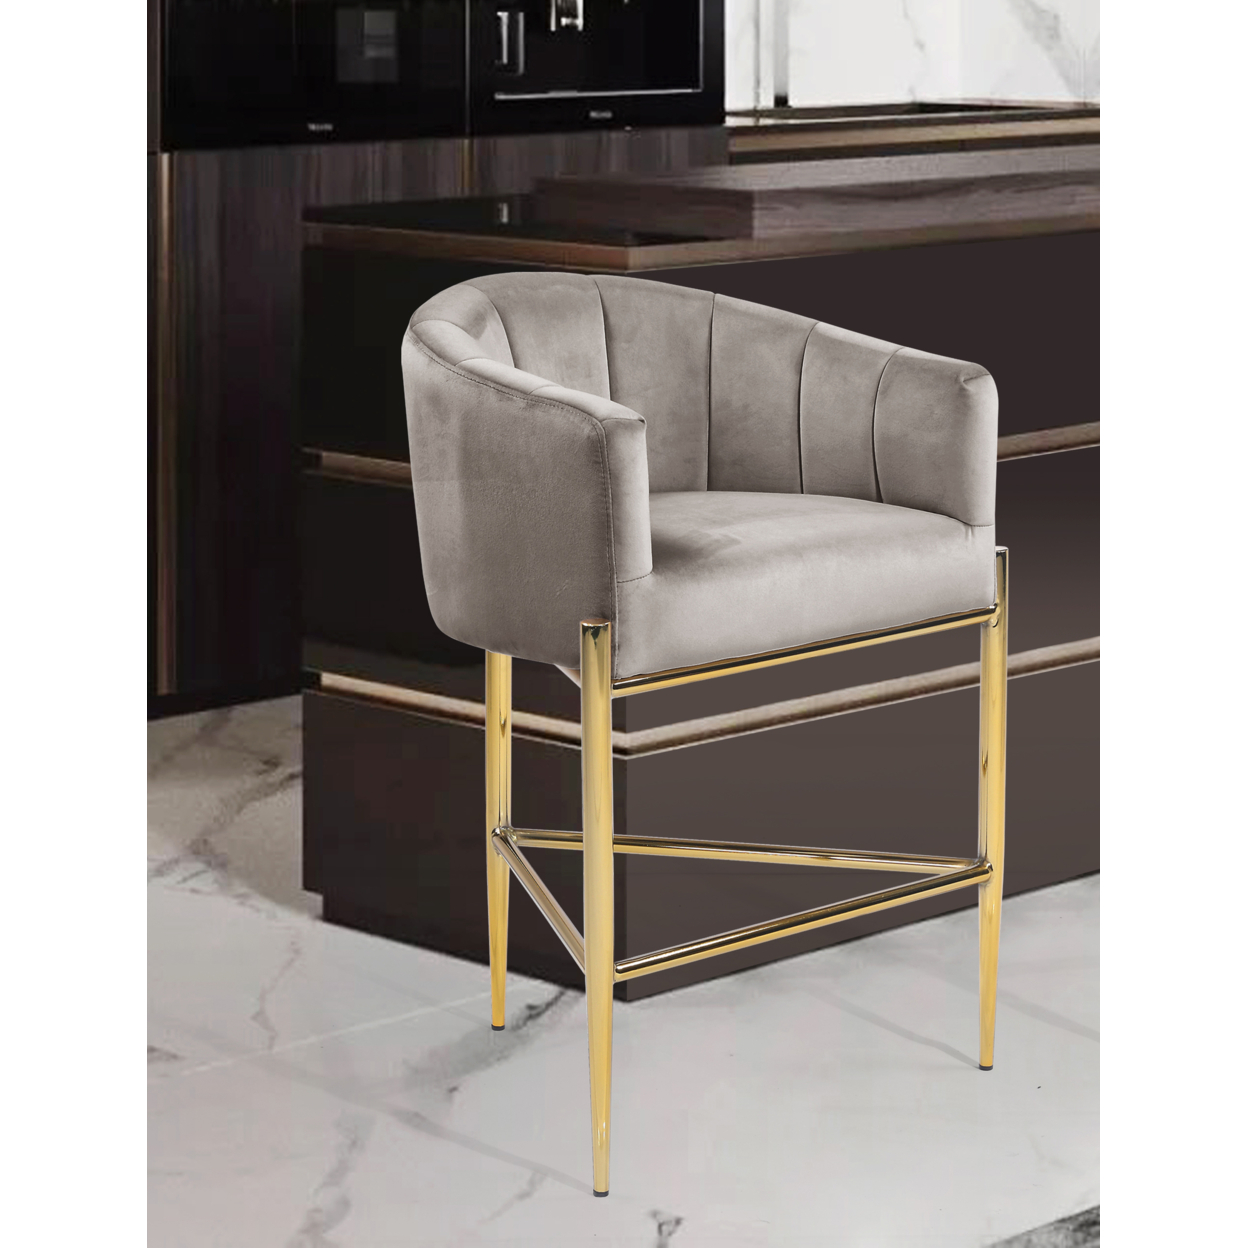 Iconic Home Ardee Counter Stool Chair Velvet Upholstered Shelter Arm Shell Design 3 Legged Gold Tone Solid Metal Base - Taupe